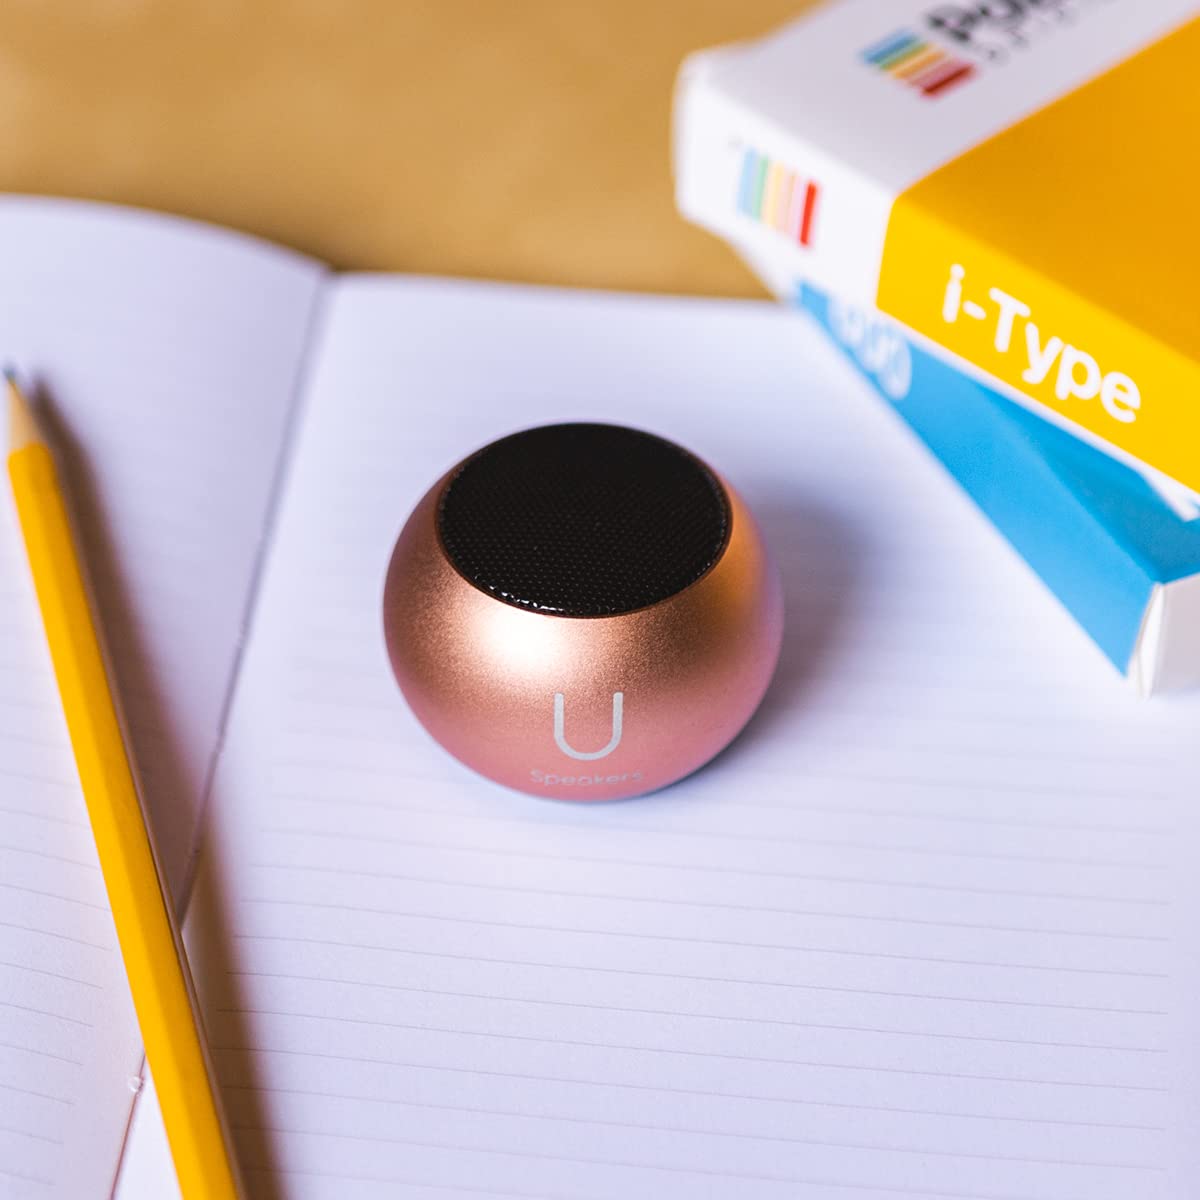 Fashionit U Mini Speaker | Stylish Portable Wireless Bluetooth 5.0 with Built-in Mic & Remote Shutter | Perfect Mini Speaker for Home, Parties, Activities! Small Device, Rich Sound | Rose Gold